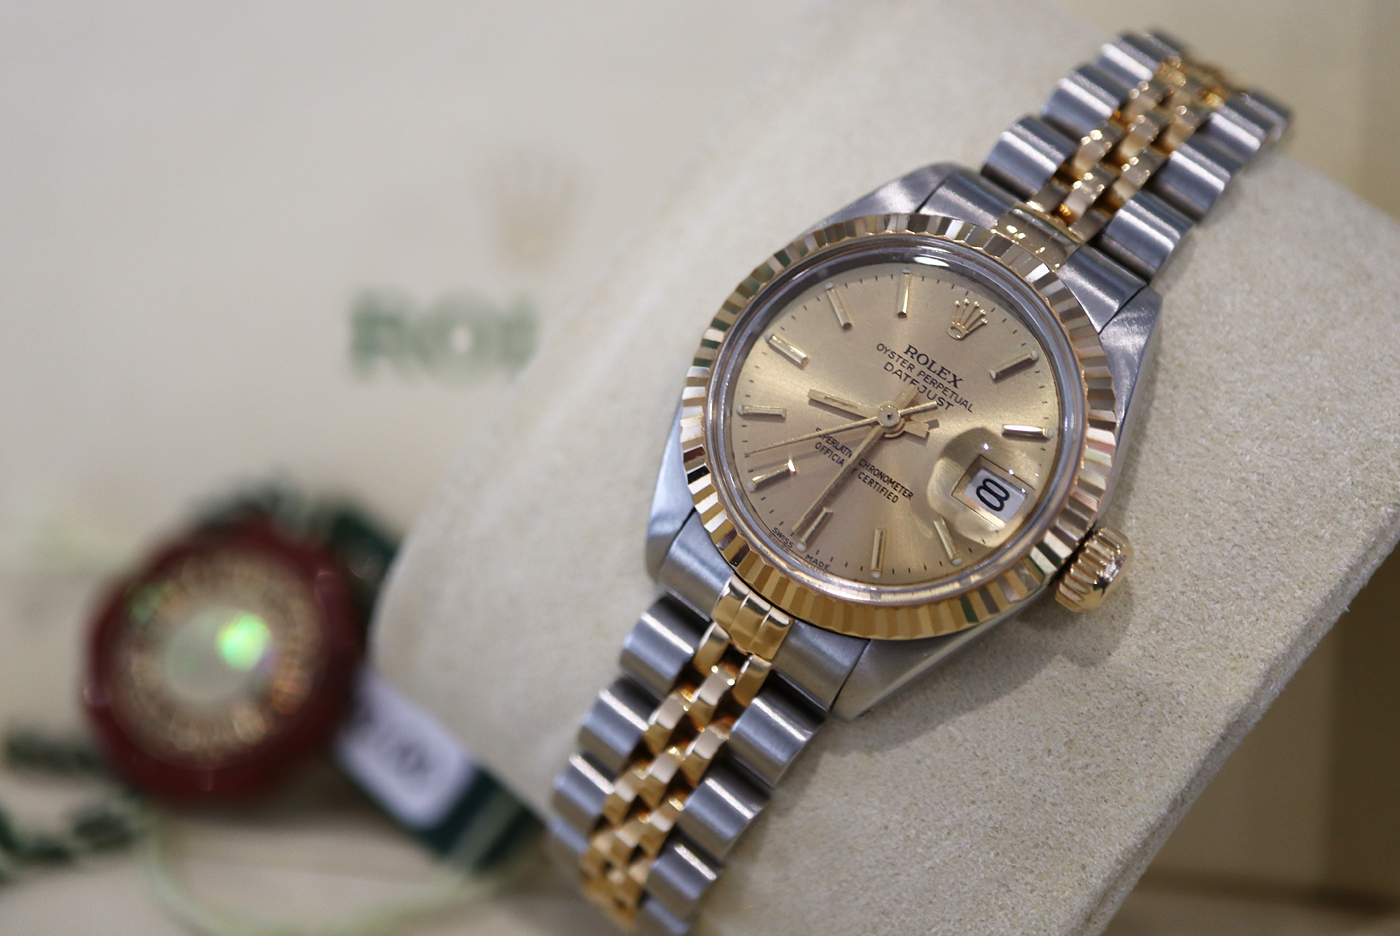 ROLEX DATEJUST 18K / STEEL *CHAMPAGNE* - BOX SET / BOOKLETS / TAGS - Image 9 of 13